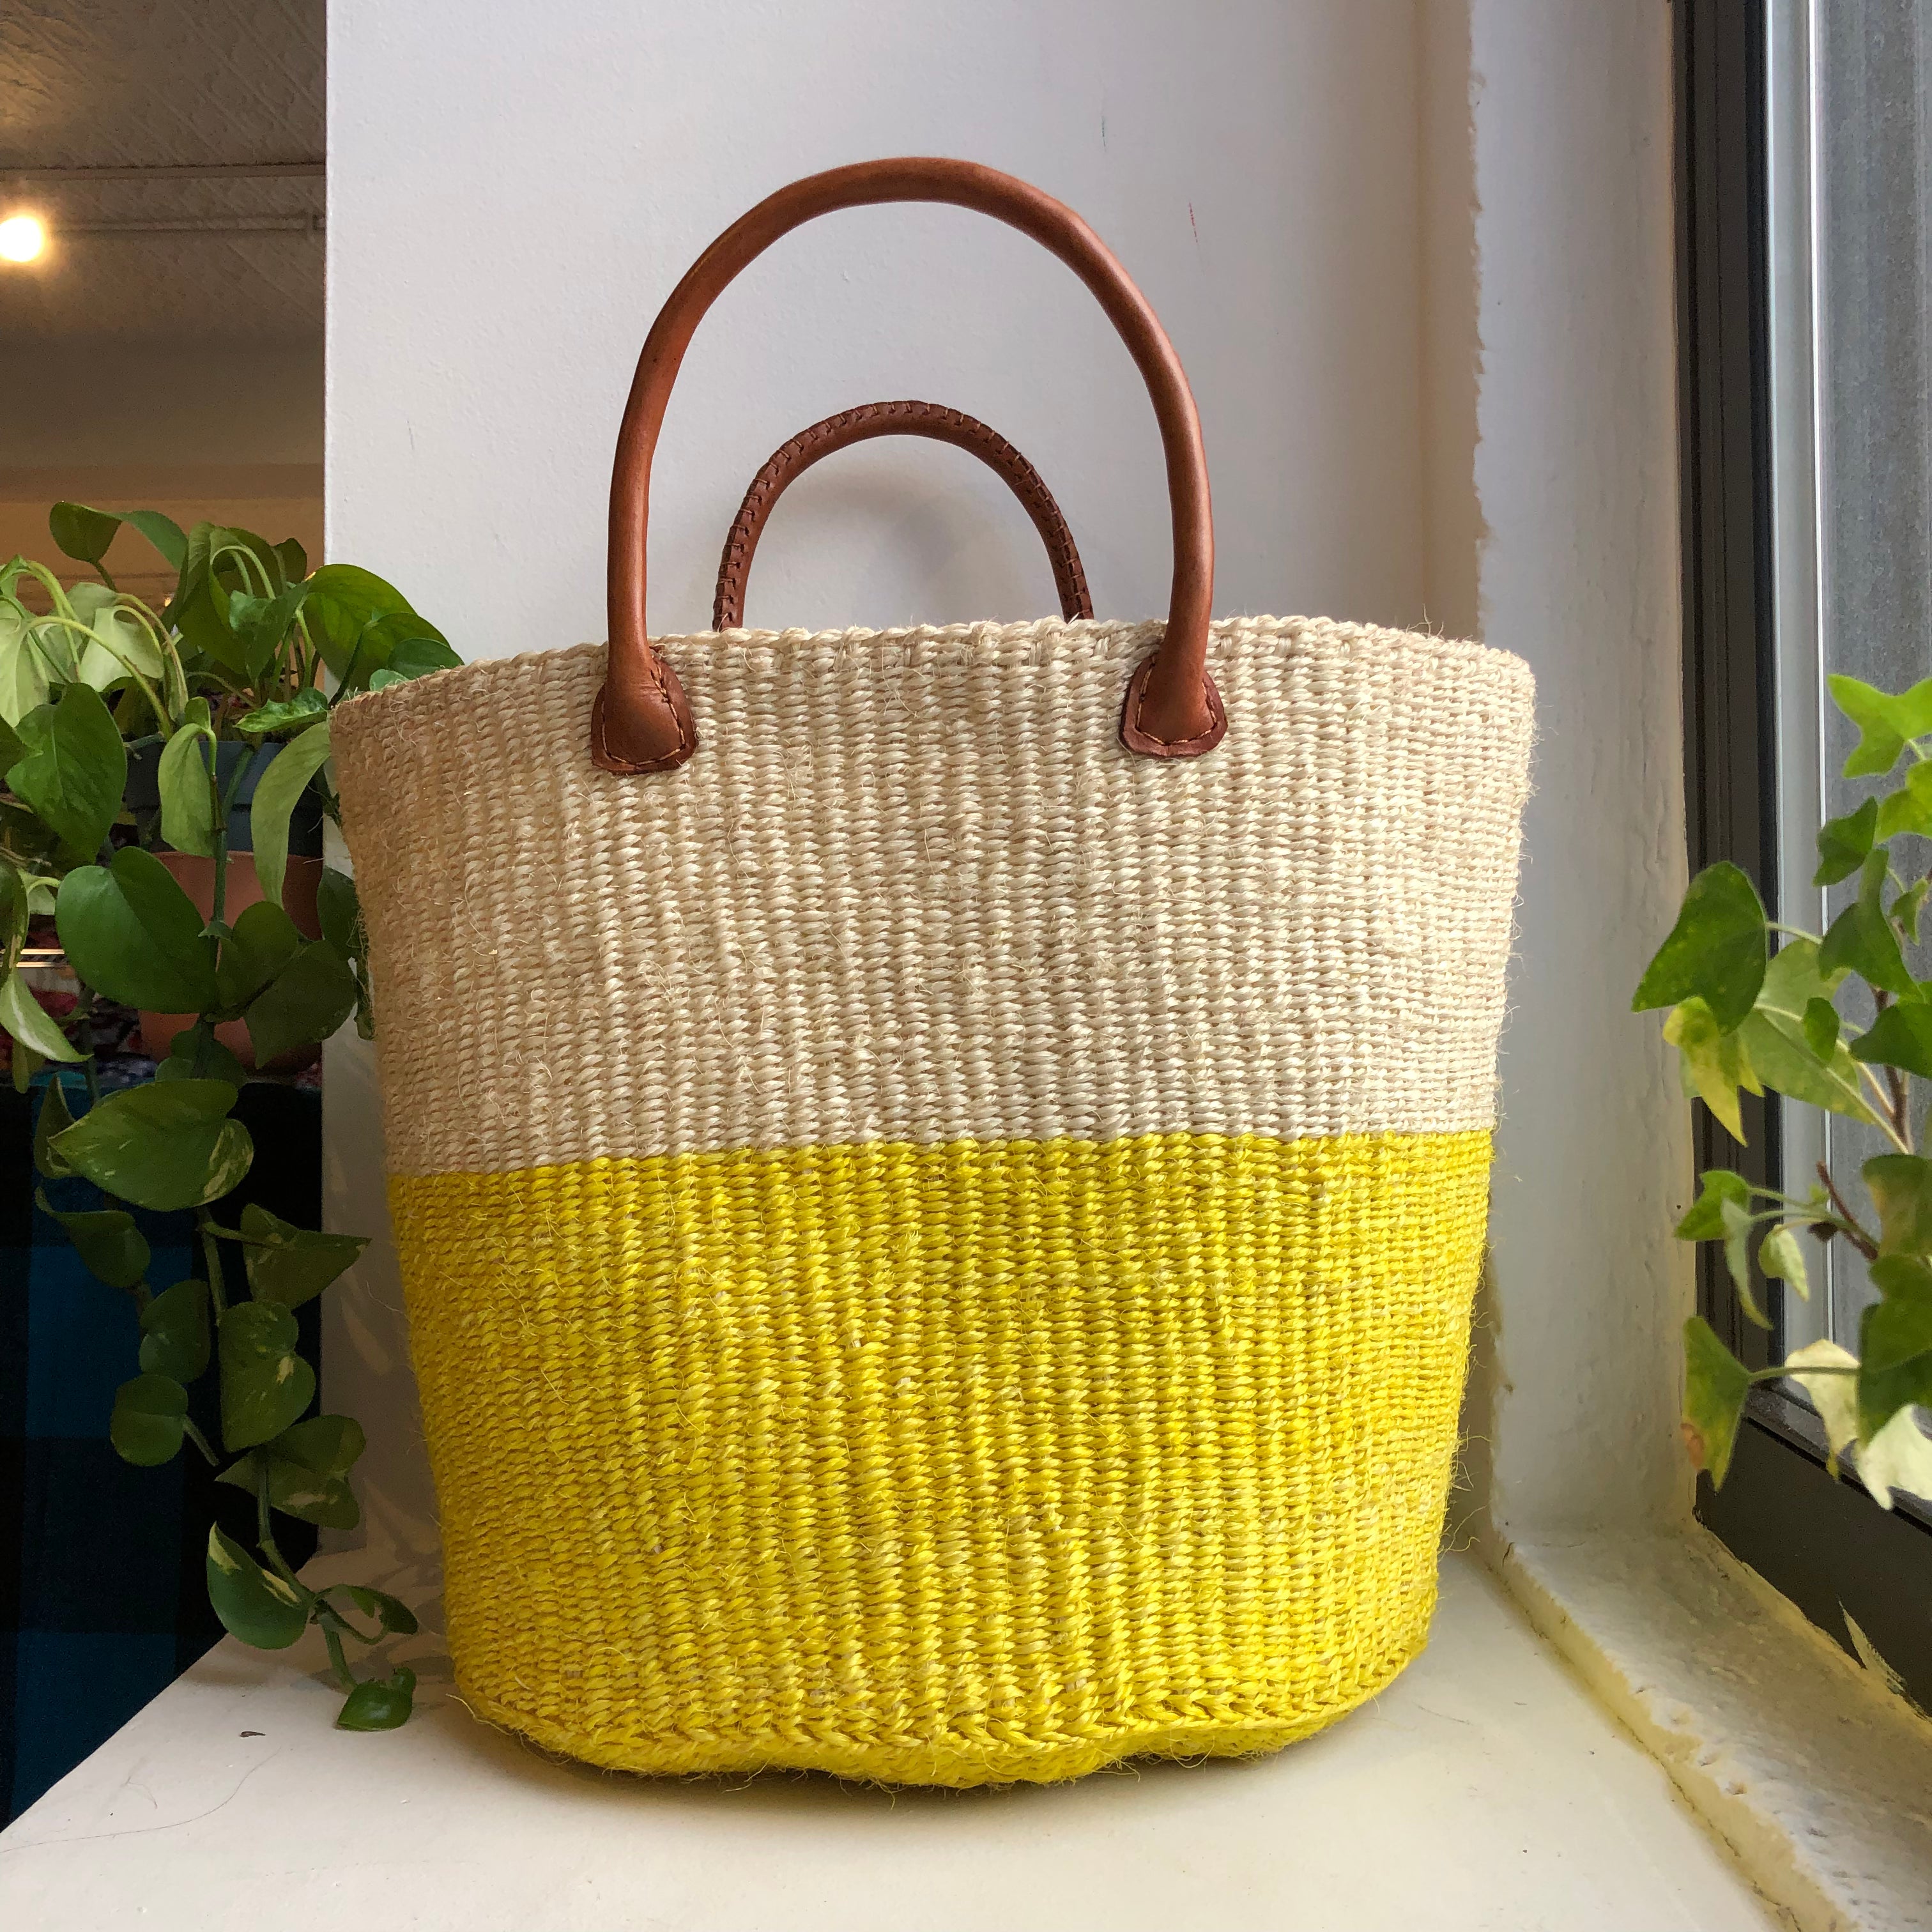 Yellow and white color block sisal woven basket with leather handles.